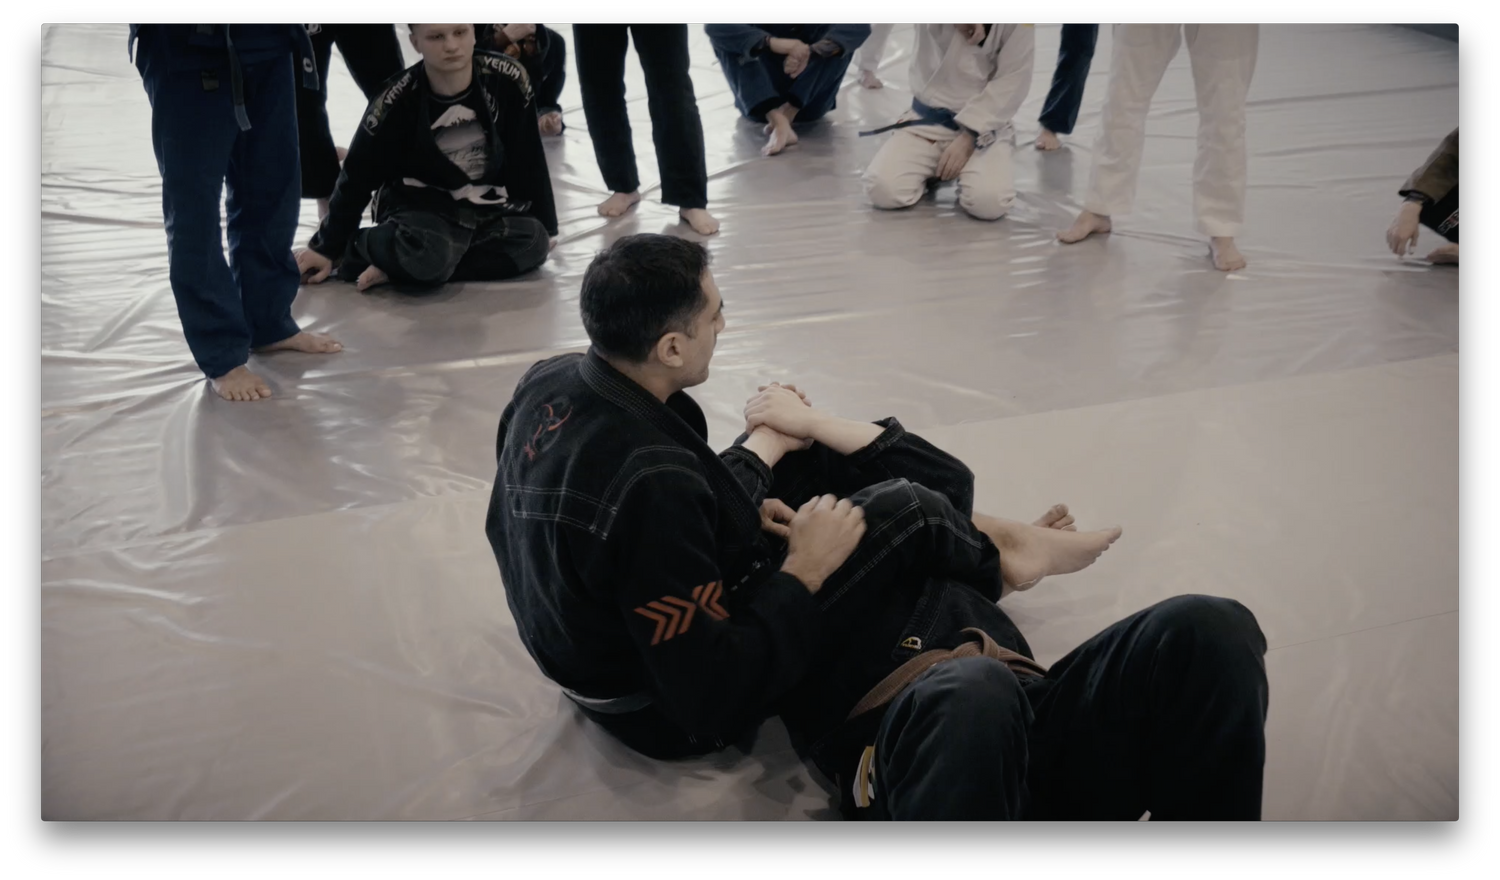 Moscow: The Art of Jiu Jitsu in Russia by Roy Dean (On Demand) - Budovideos Inc